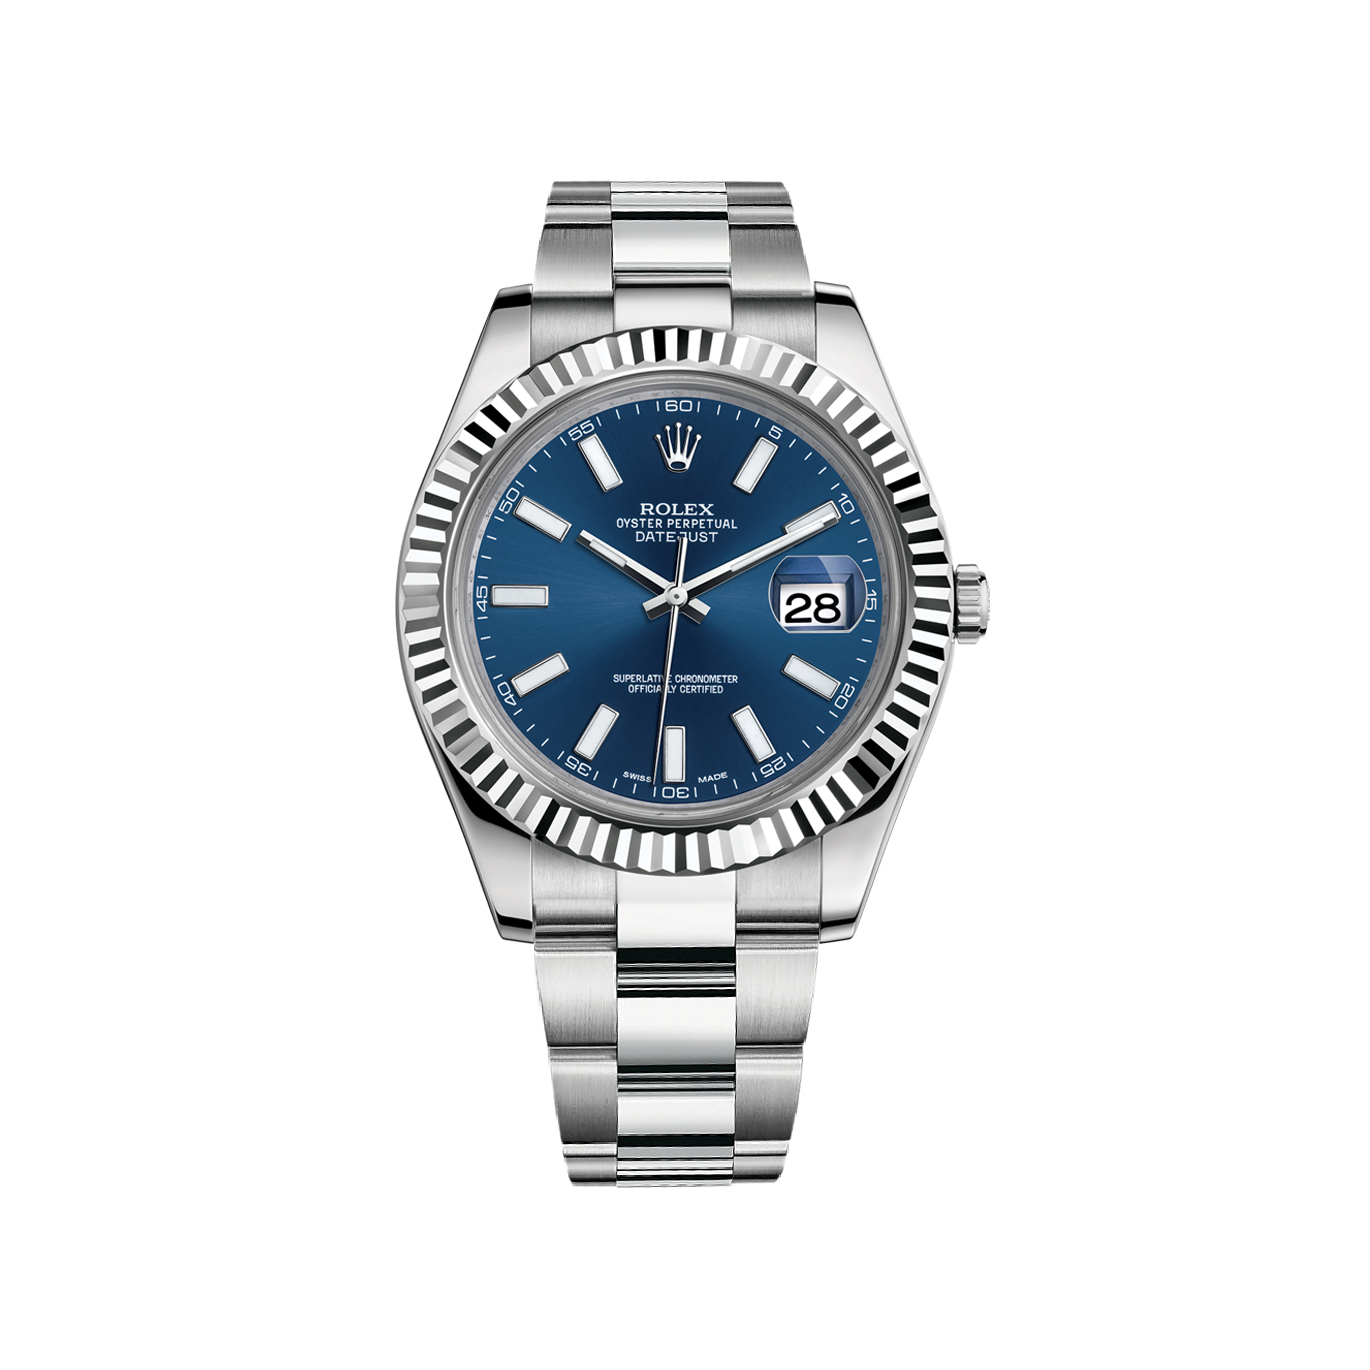 Datejust II 116334 White Gold & Stainless Steel Watch (Blue)